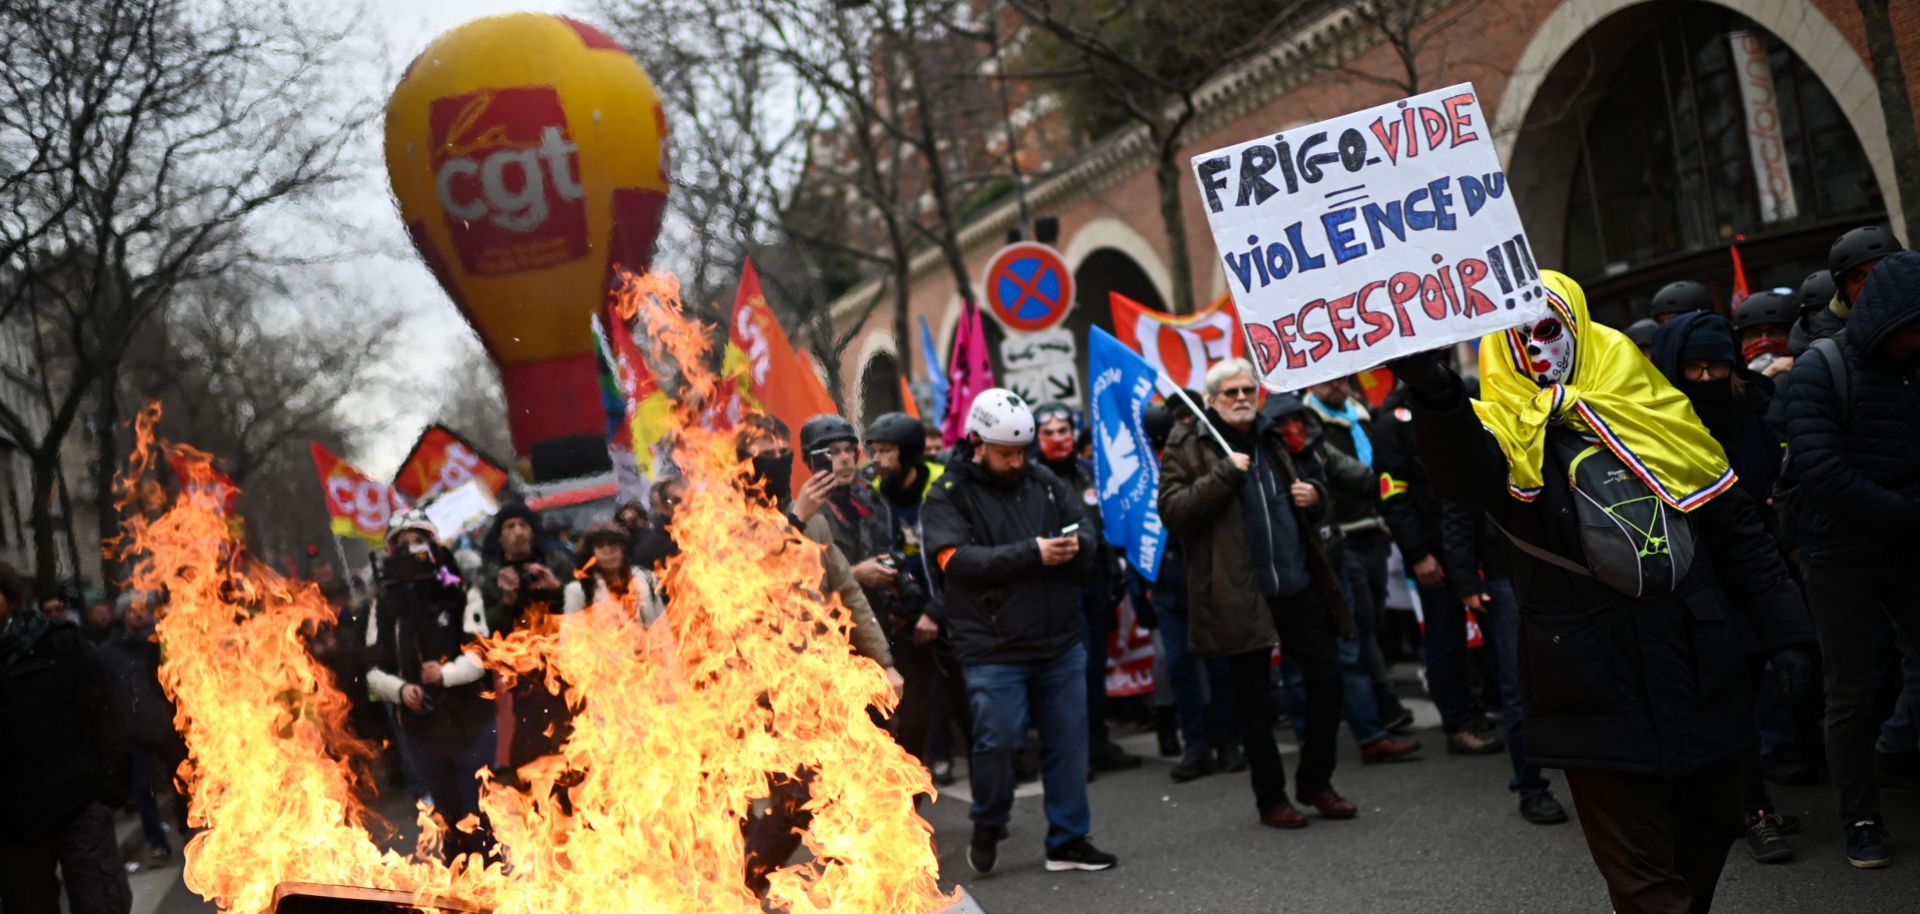 A protestor holds a placard that reads ''Empty Fridge Equals Violence of Dispair'' near a pile of burning trash during a demonstration in Paris, France, against the government's proposed pension reform on March 11, 2023. 